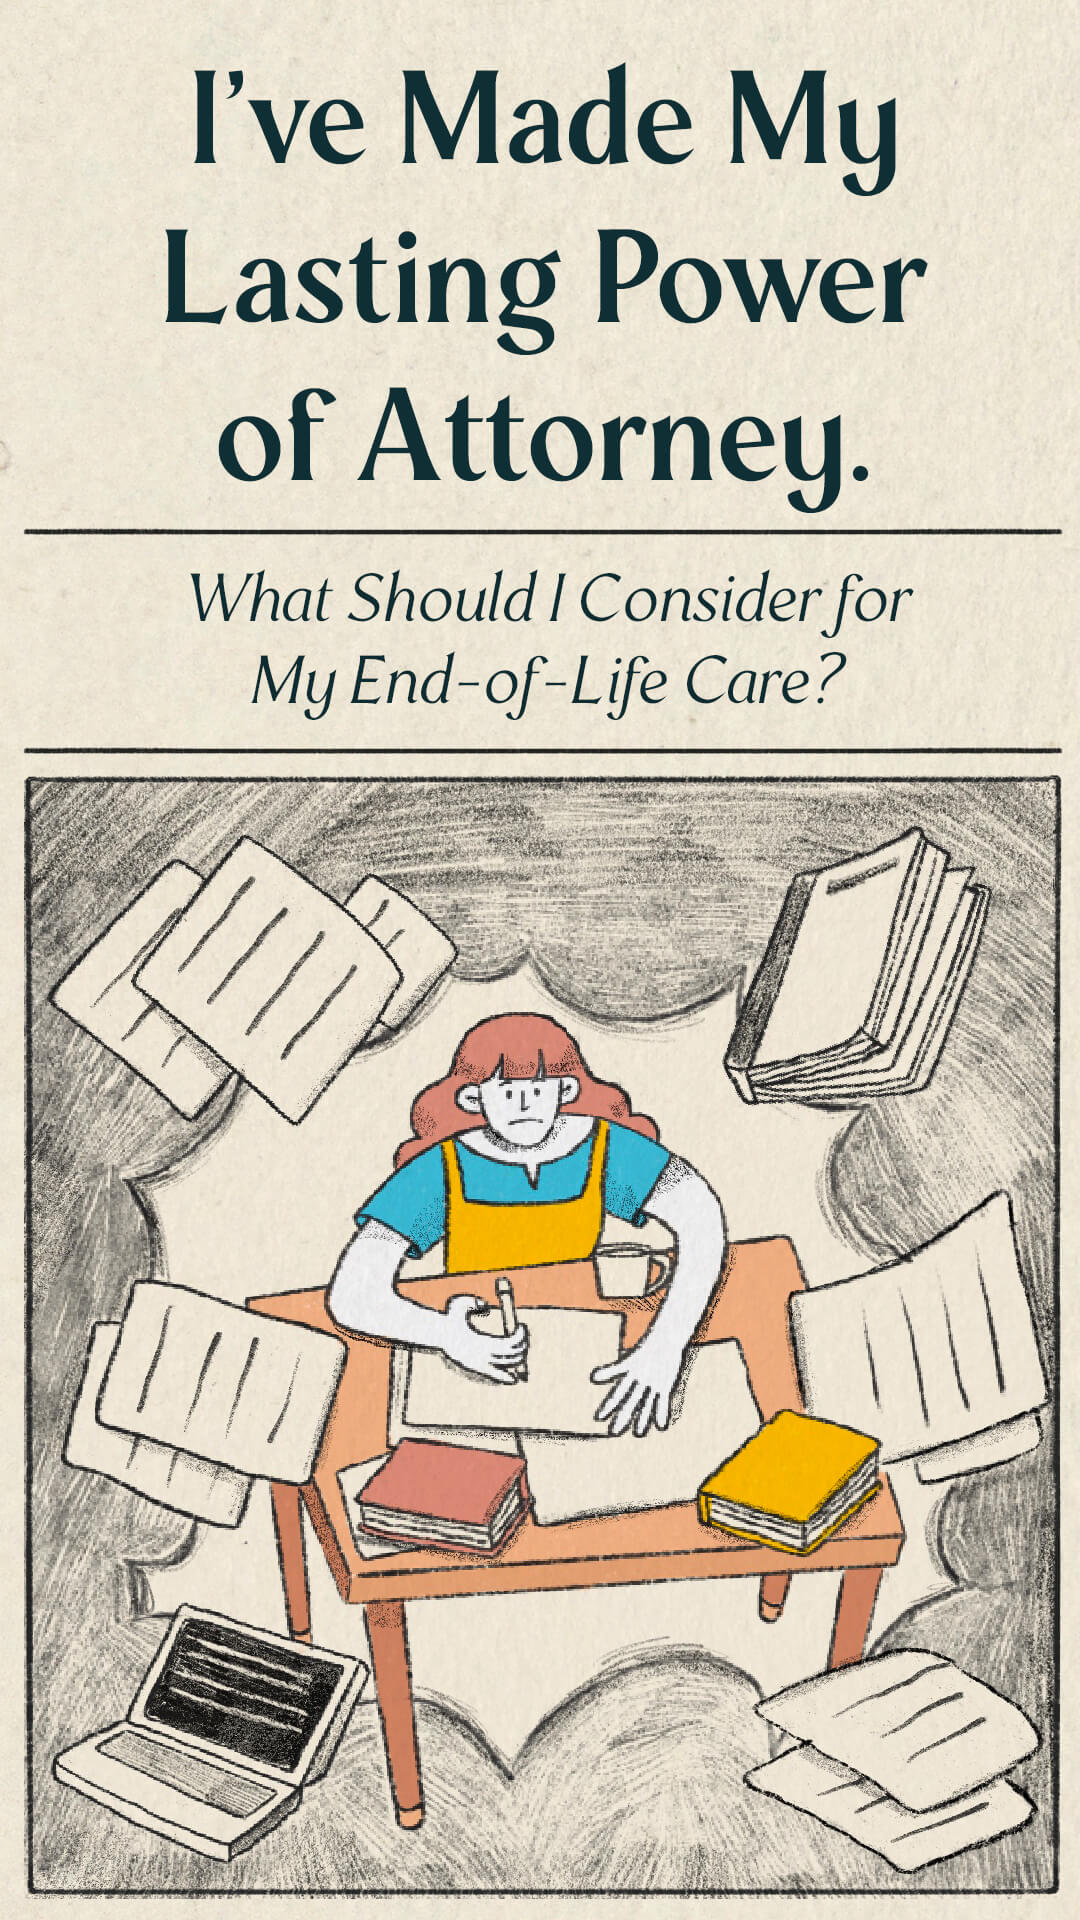 Making Gifts under a Lasting Power of Attorney (LPA)